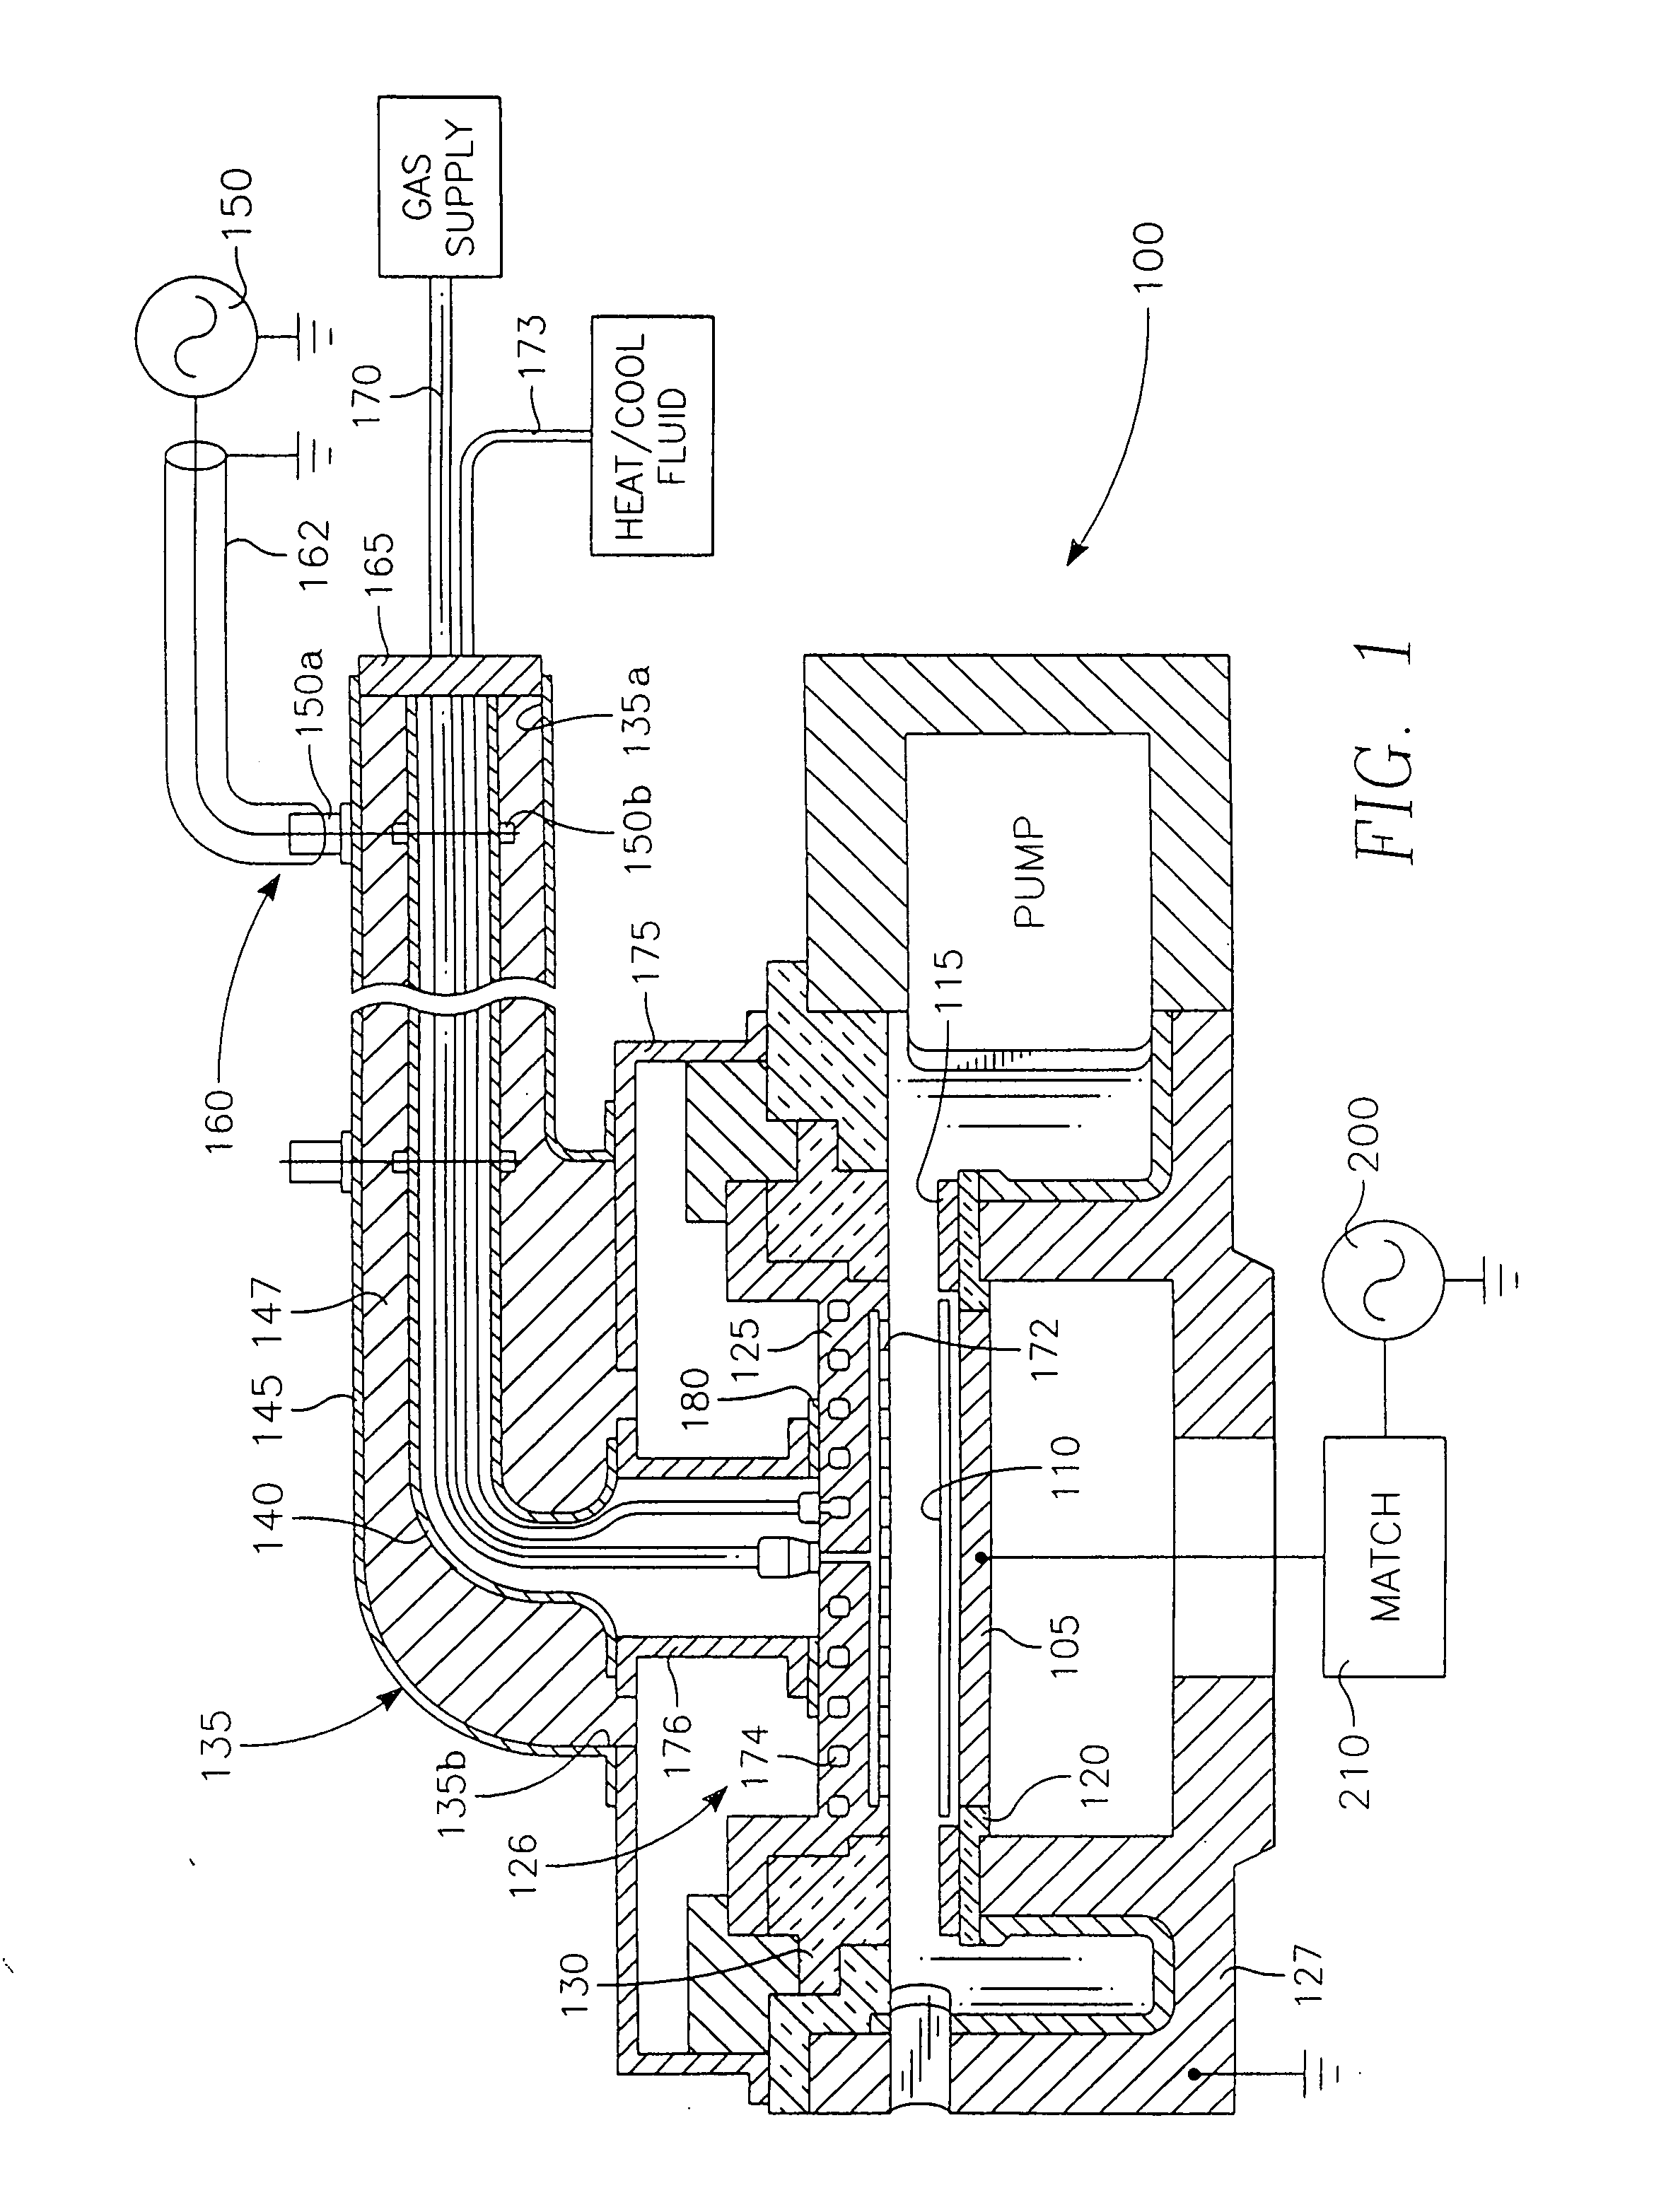 Merie plasma reactor with overhead RF electrode tuned to the plasma with arcing suppression